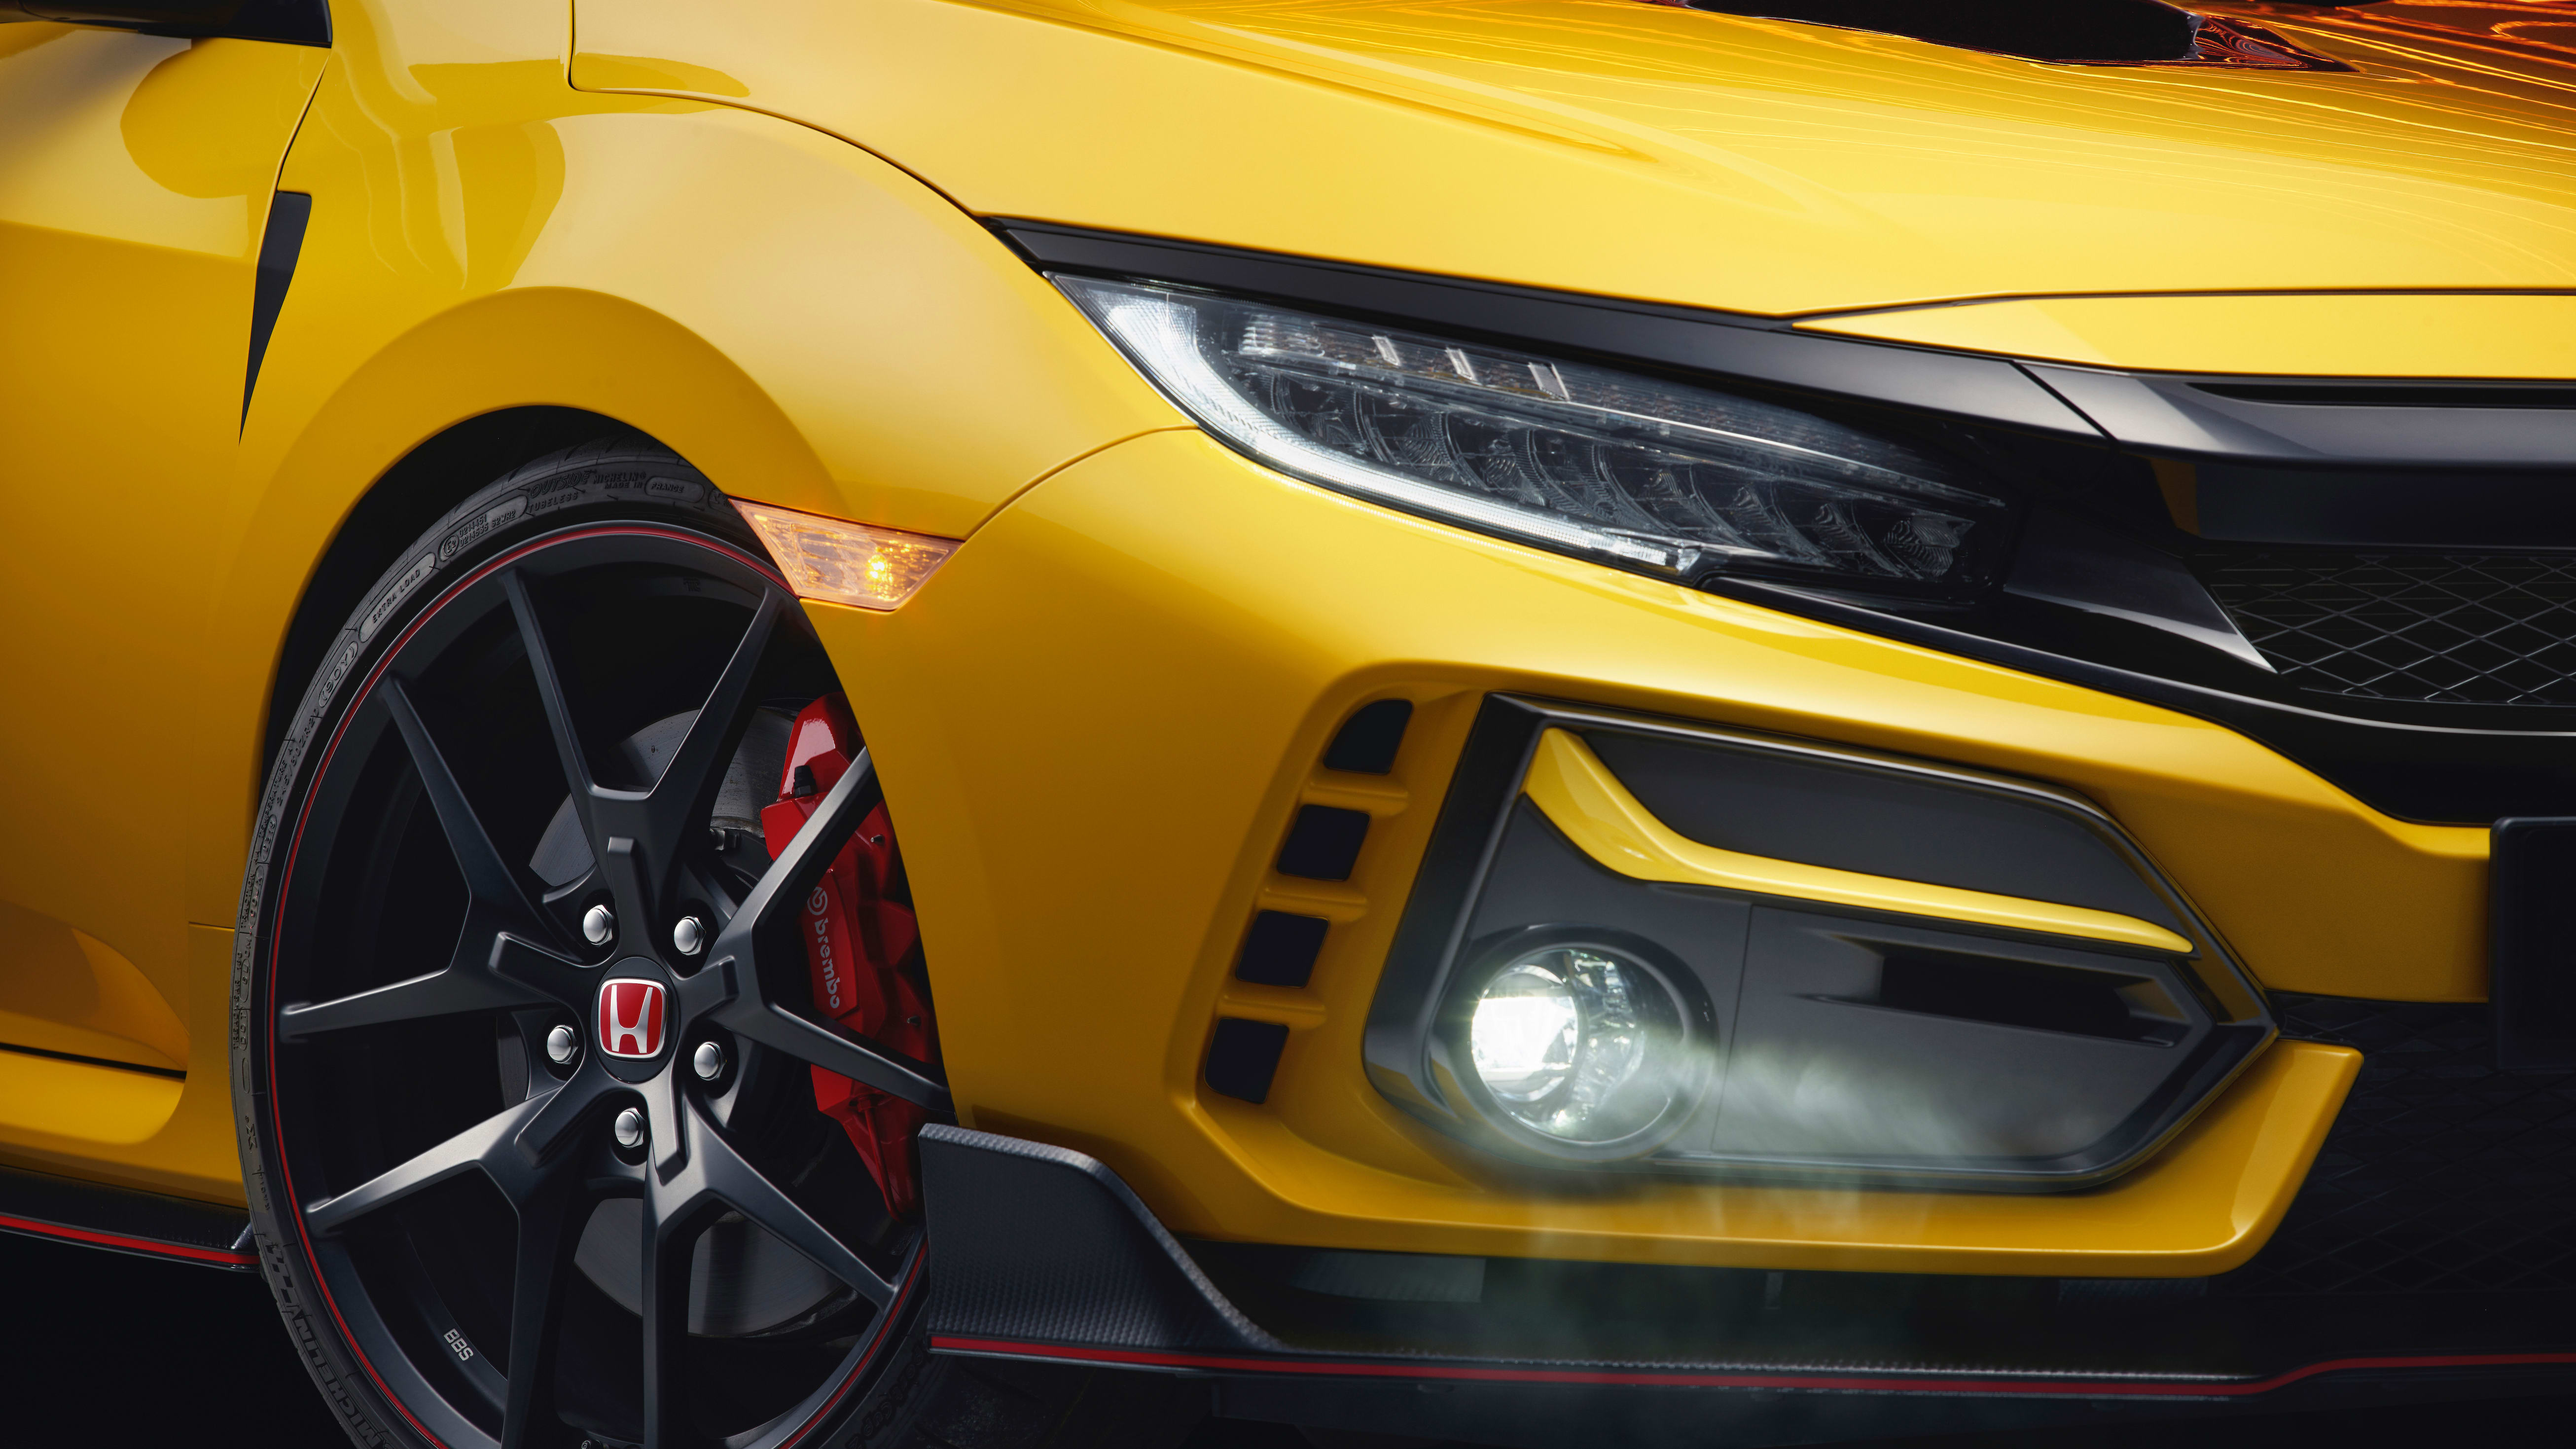 Honda Australia Has 400 Expressions Of Interest For 2021 Civic